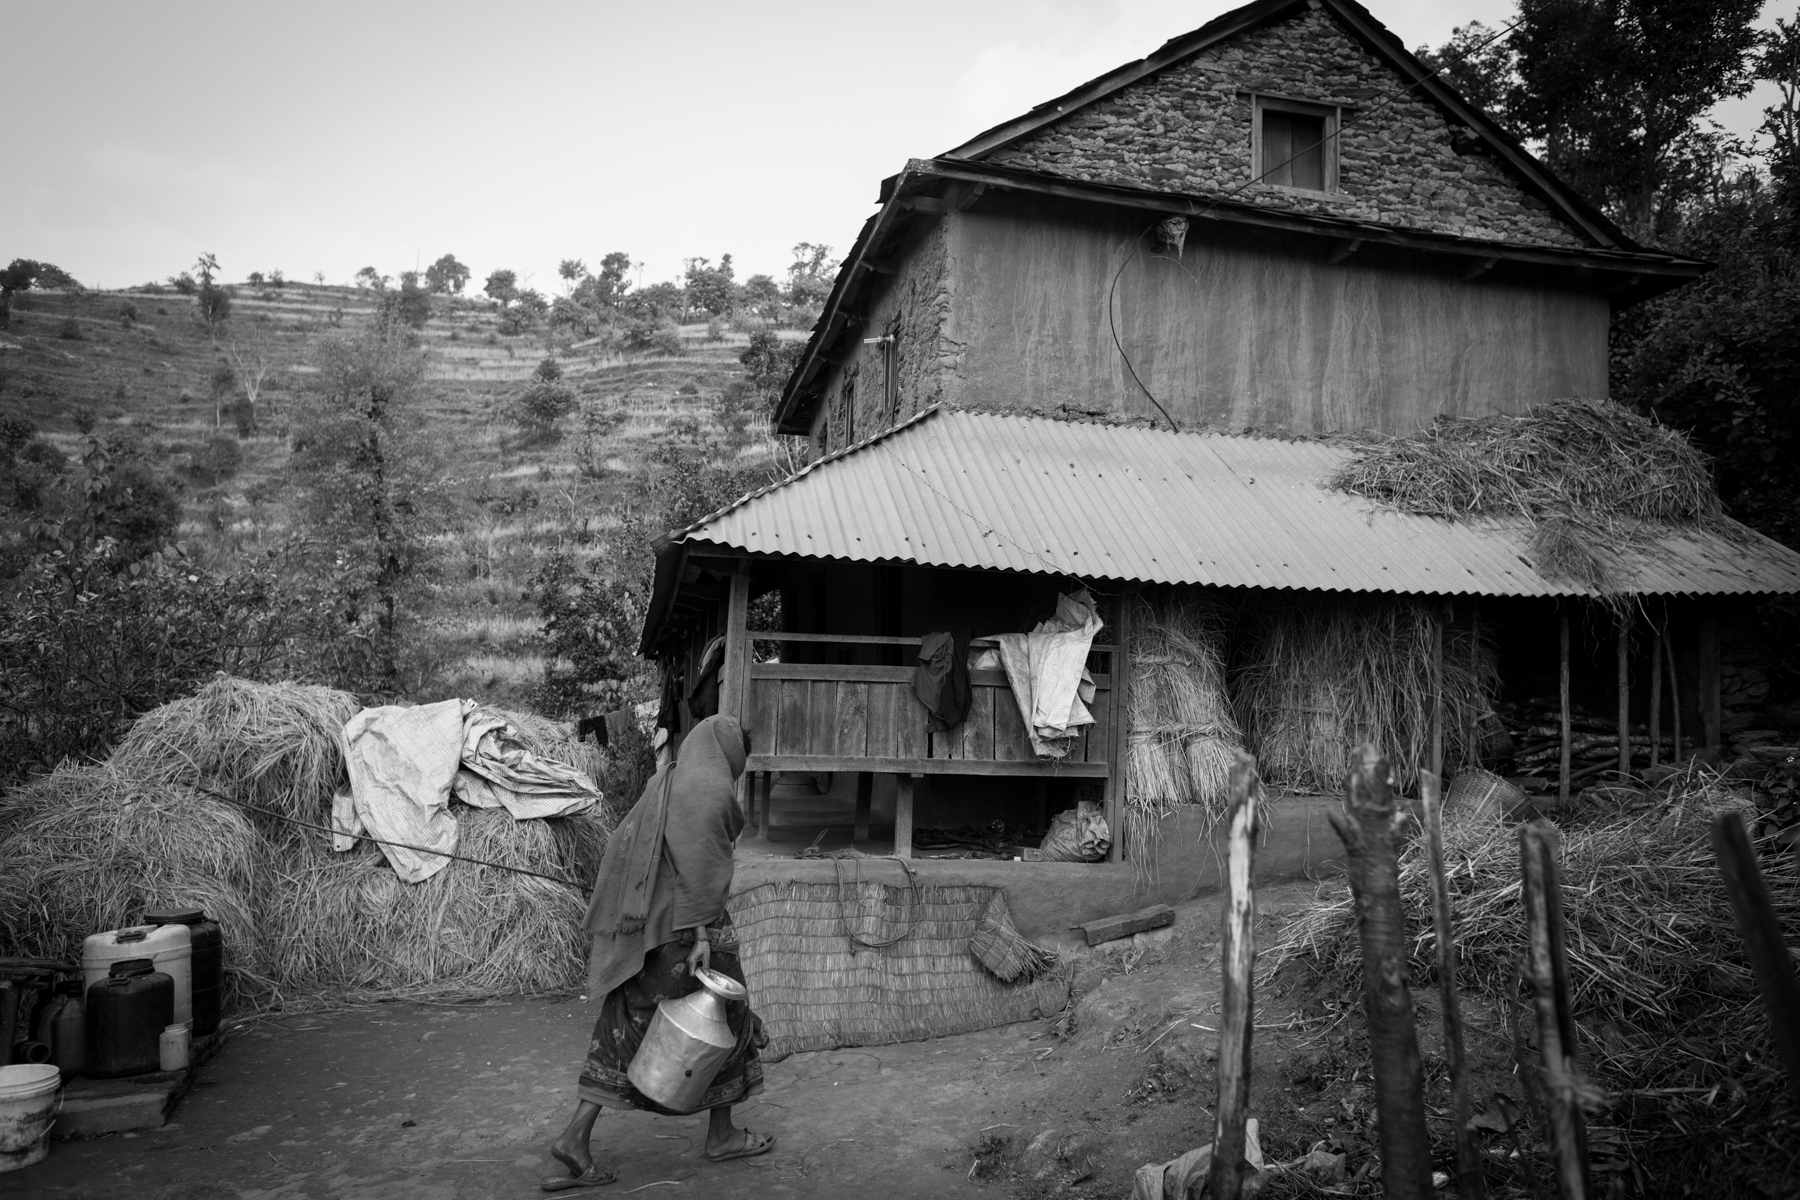 Kulpi B. K., 55, a Dalit woman at her house in the village of Ningalapani. Kalpi was beaten by neighbours and left for dead in
2010. “As I live alone, I face
discrimination every day from some of the villagers”. 19 December 2013, Dhading, Nepal.